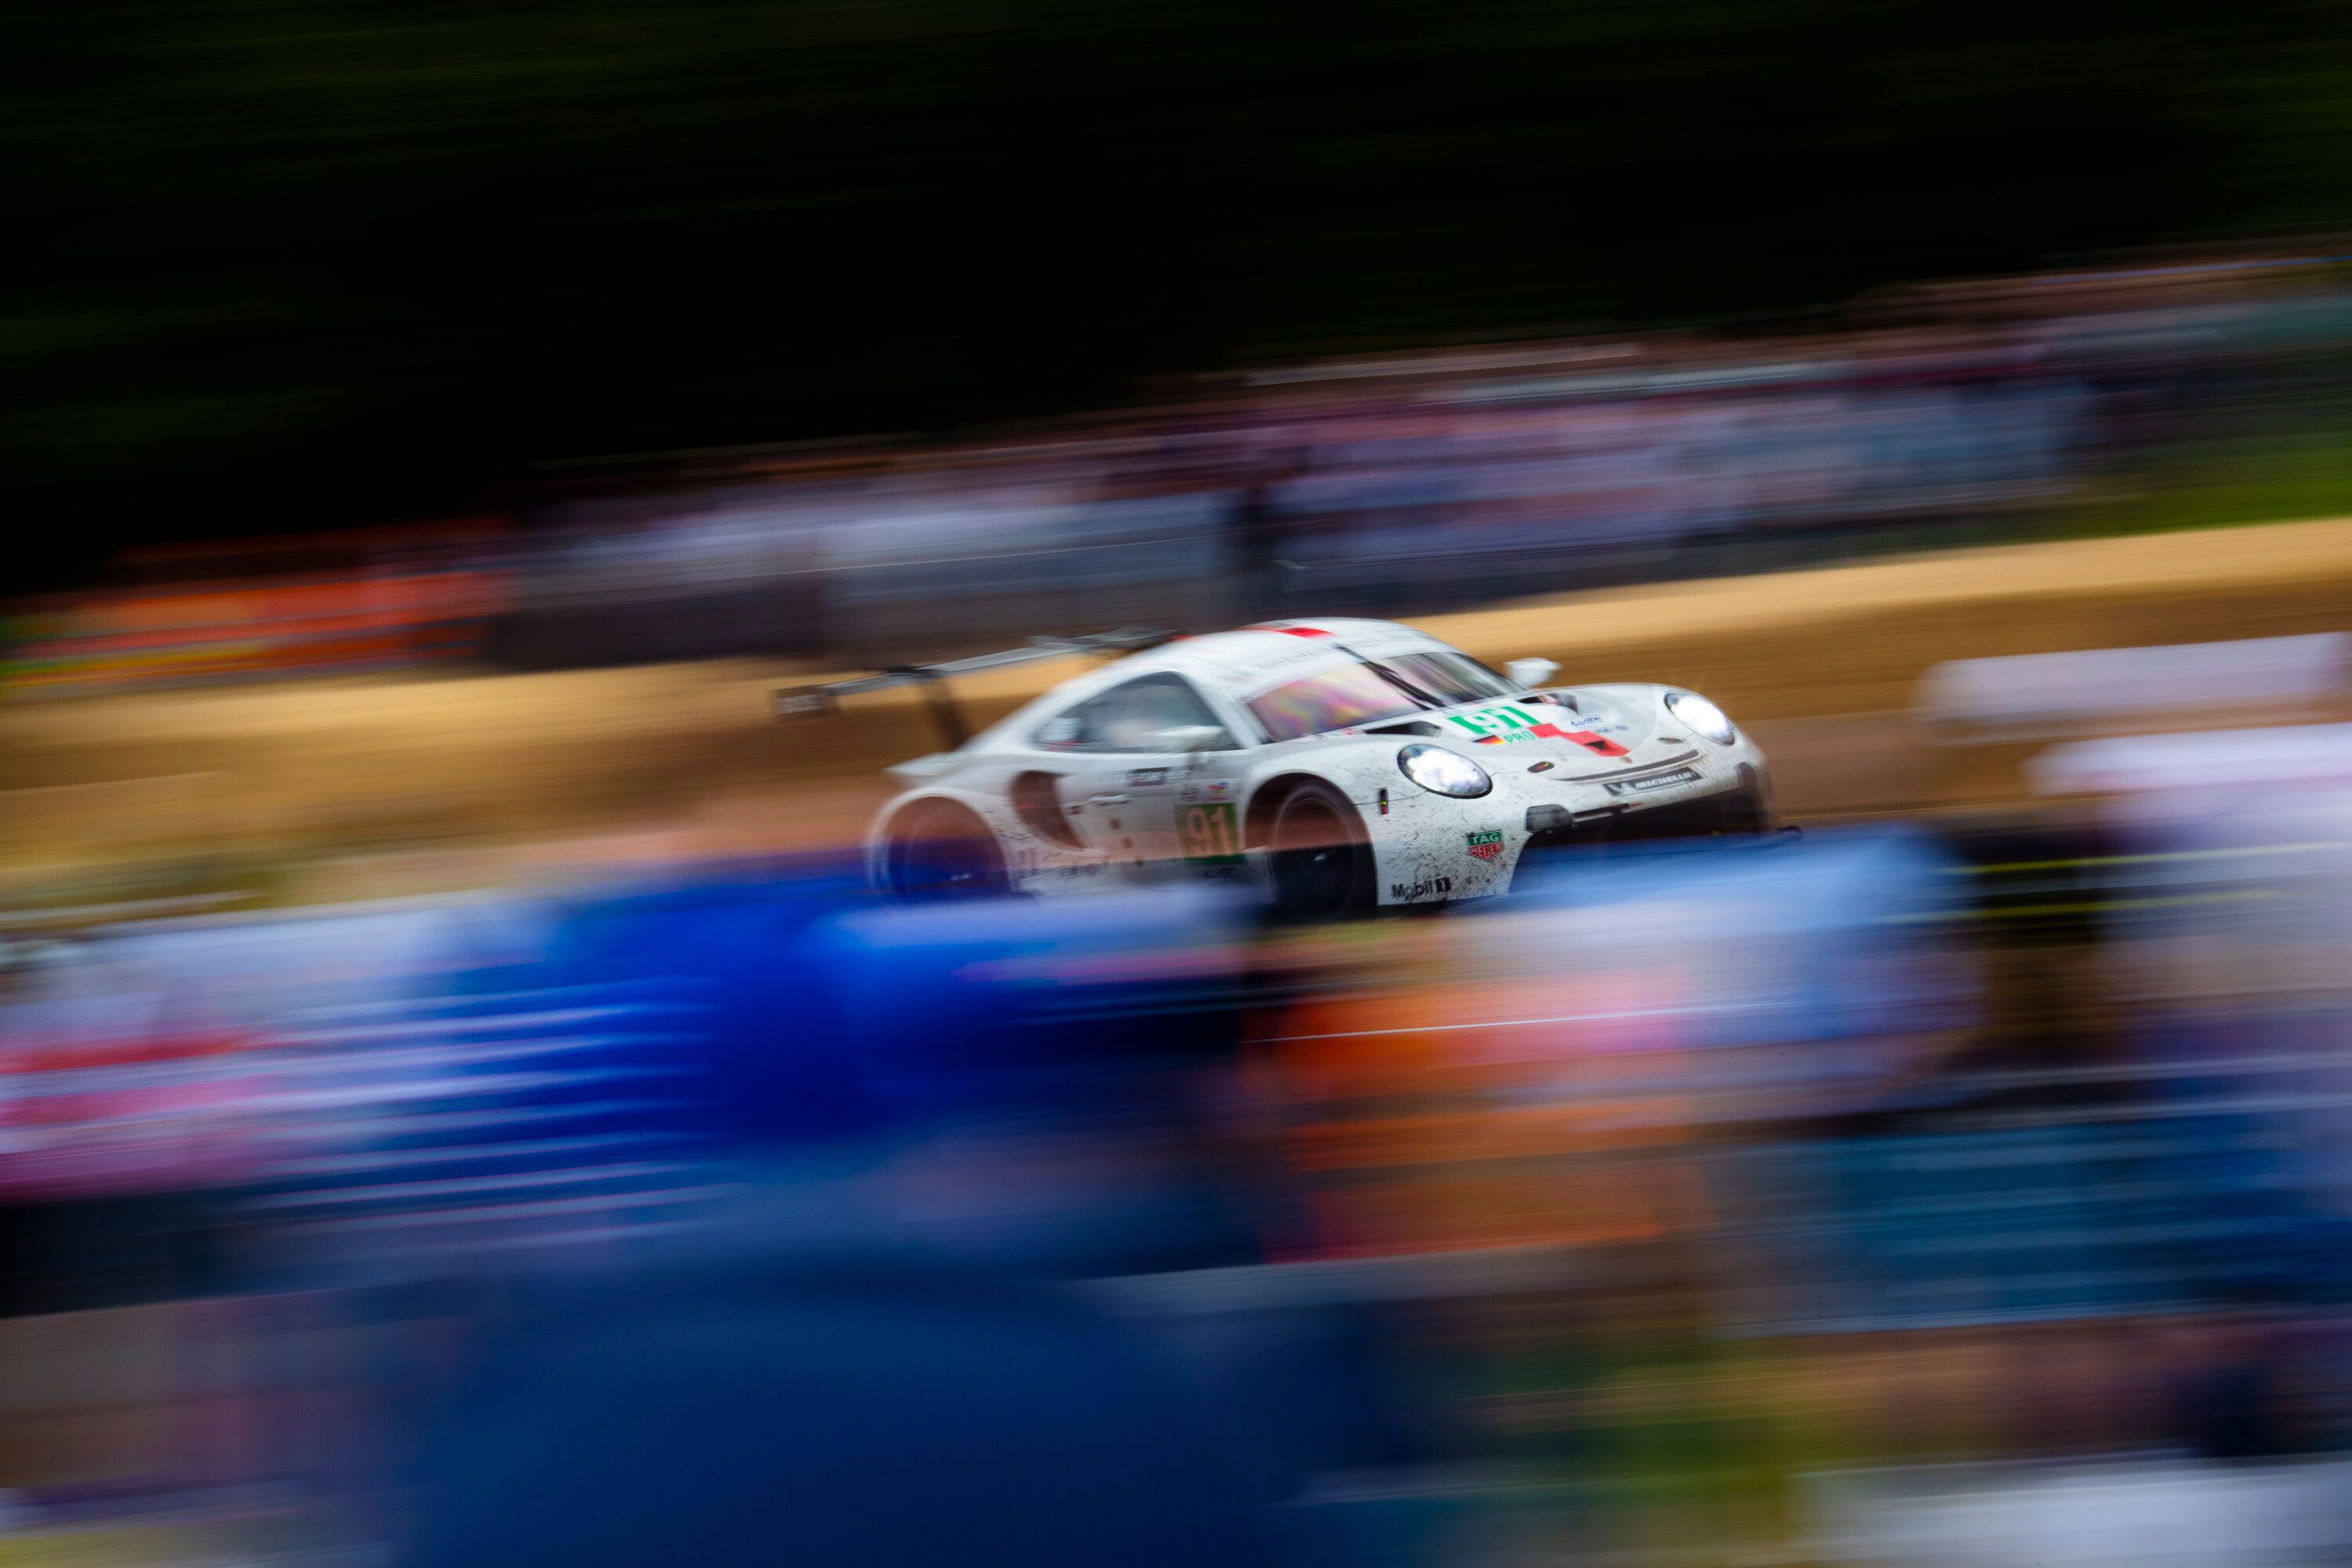 Goodwood Festival of Speed.Goodwood, Engalnd.23rd - 26th June 2022.Photo: Drew Gibson